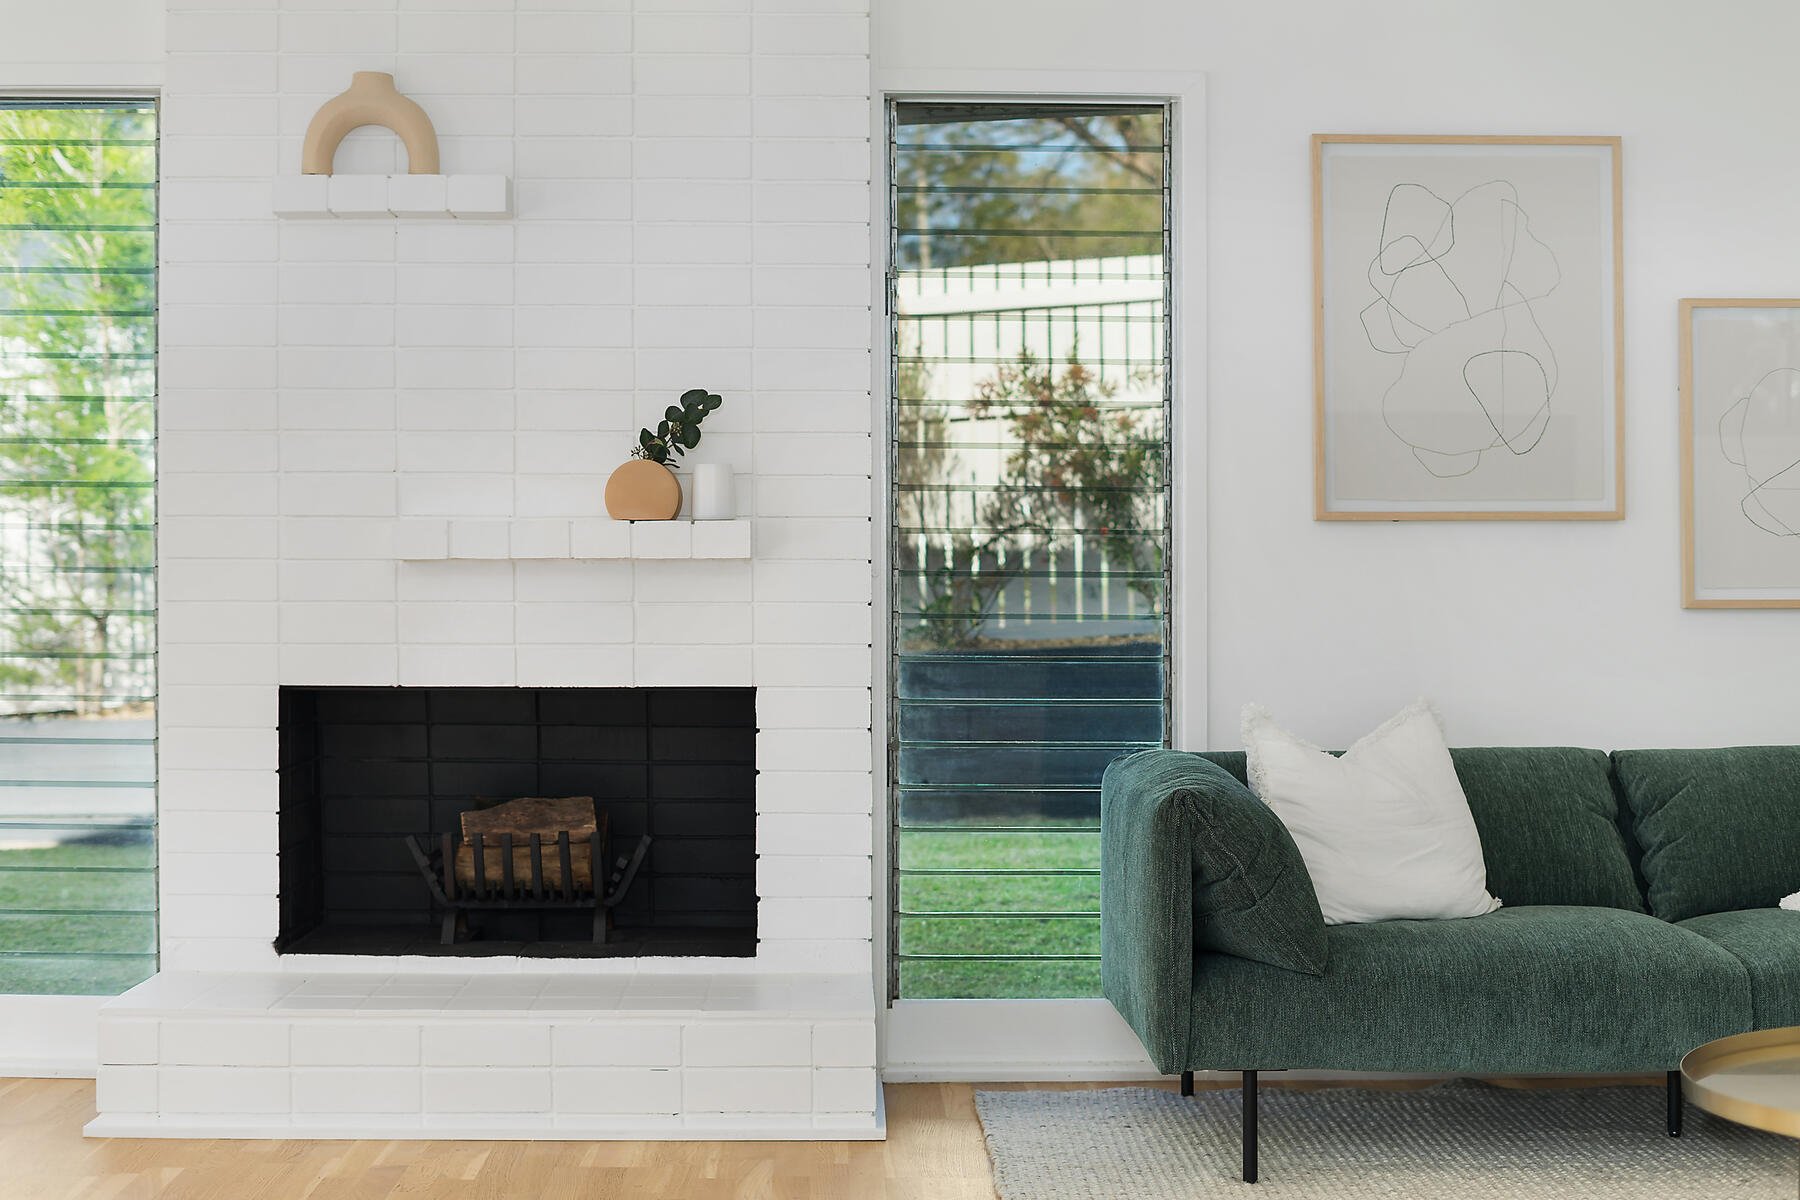 Feature fireplace with louvre windows either side and built in staggered shelving above.